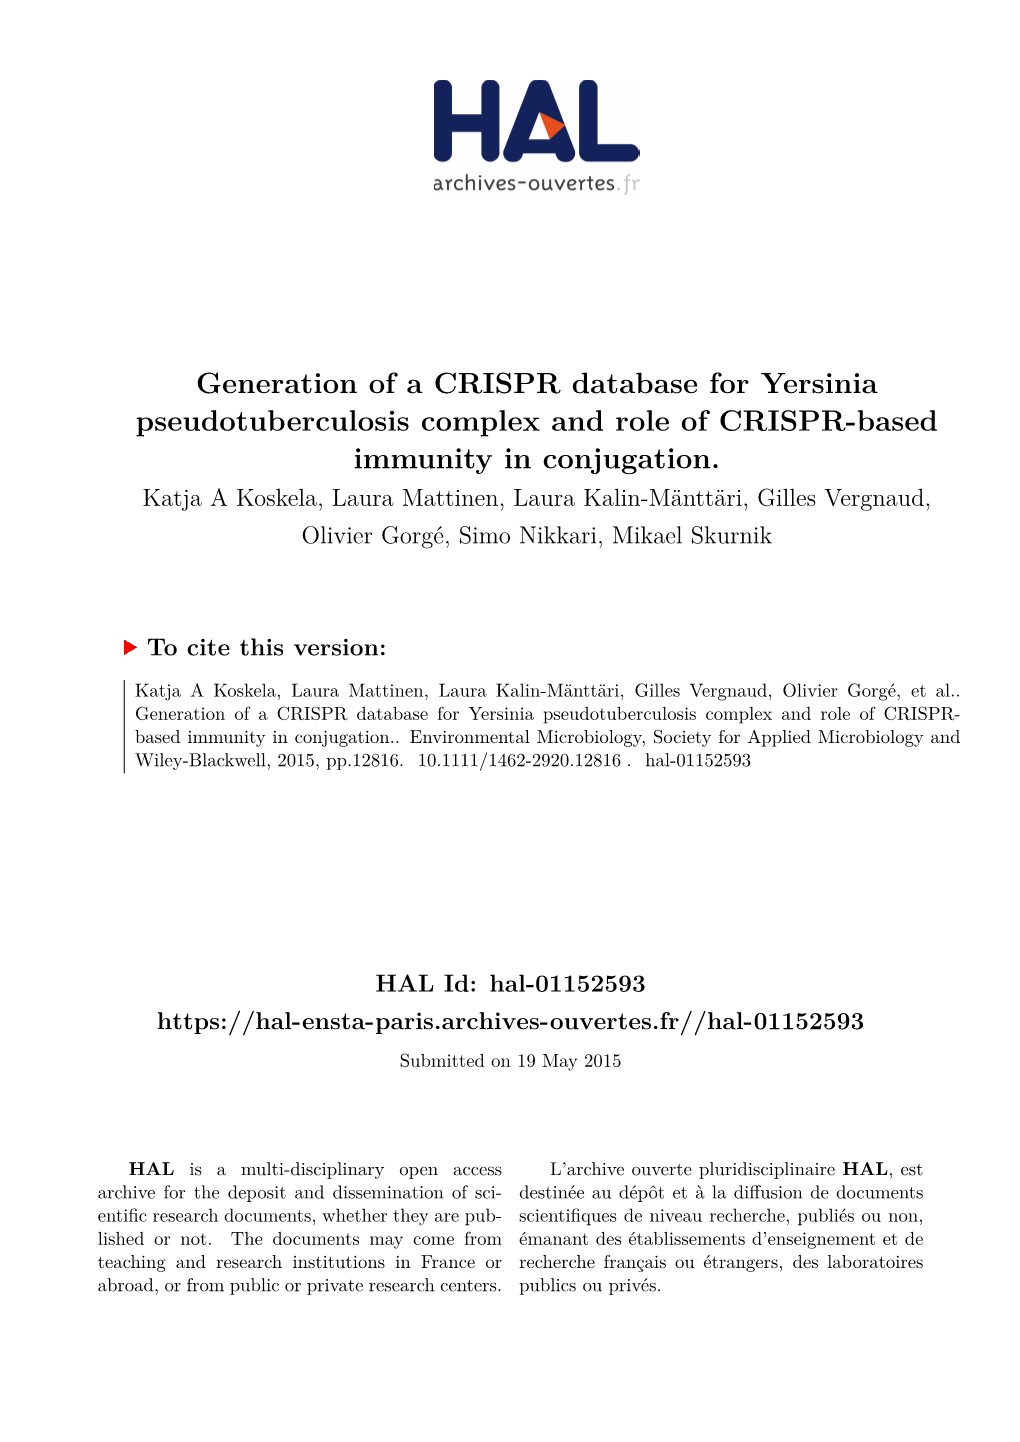 Generation of a CRISPR Database for Yersinia Pseudotuberculosis Complex and Role of CRISPR-Based Immunity in Conjugation